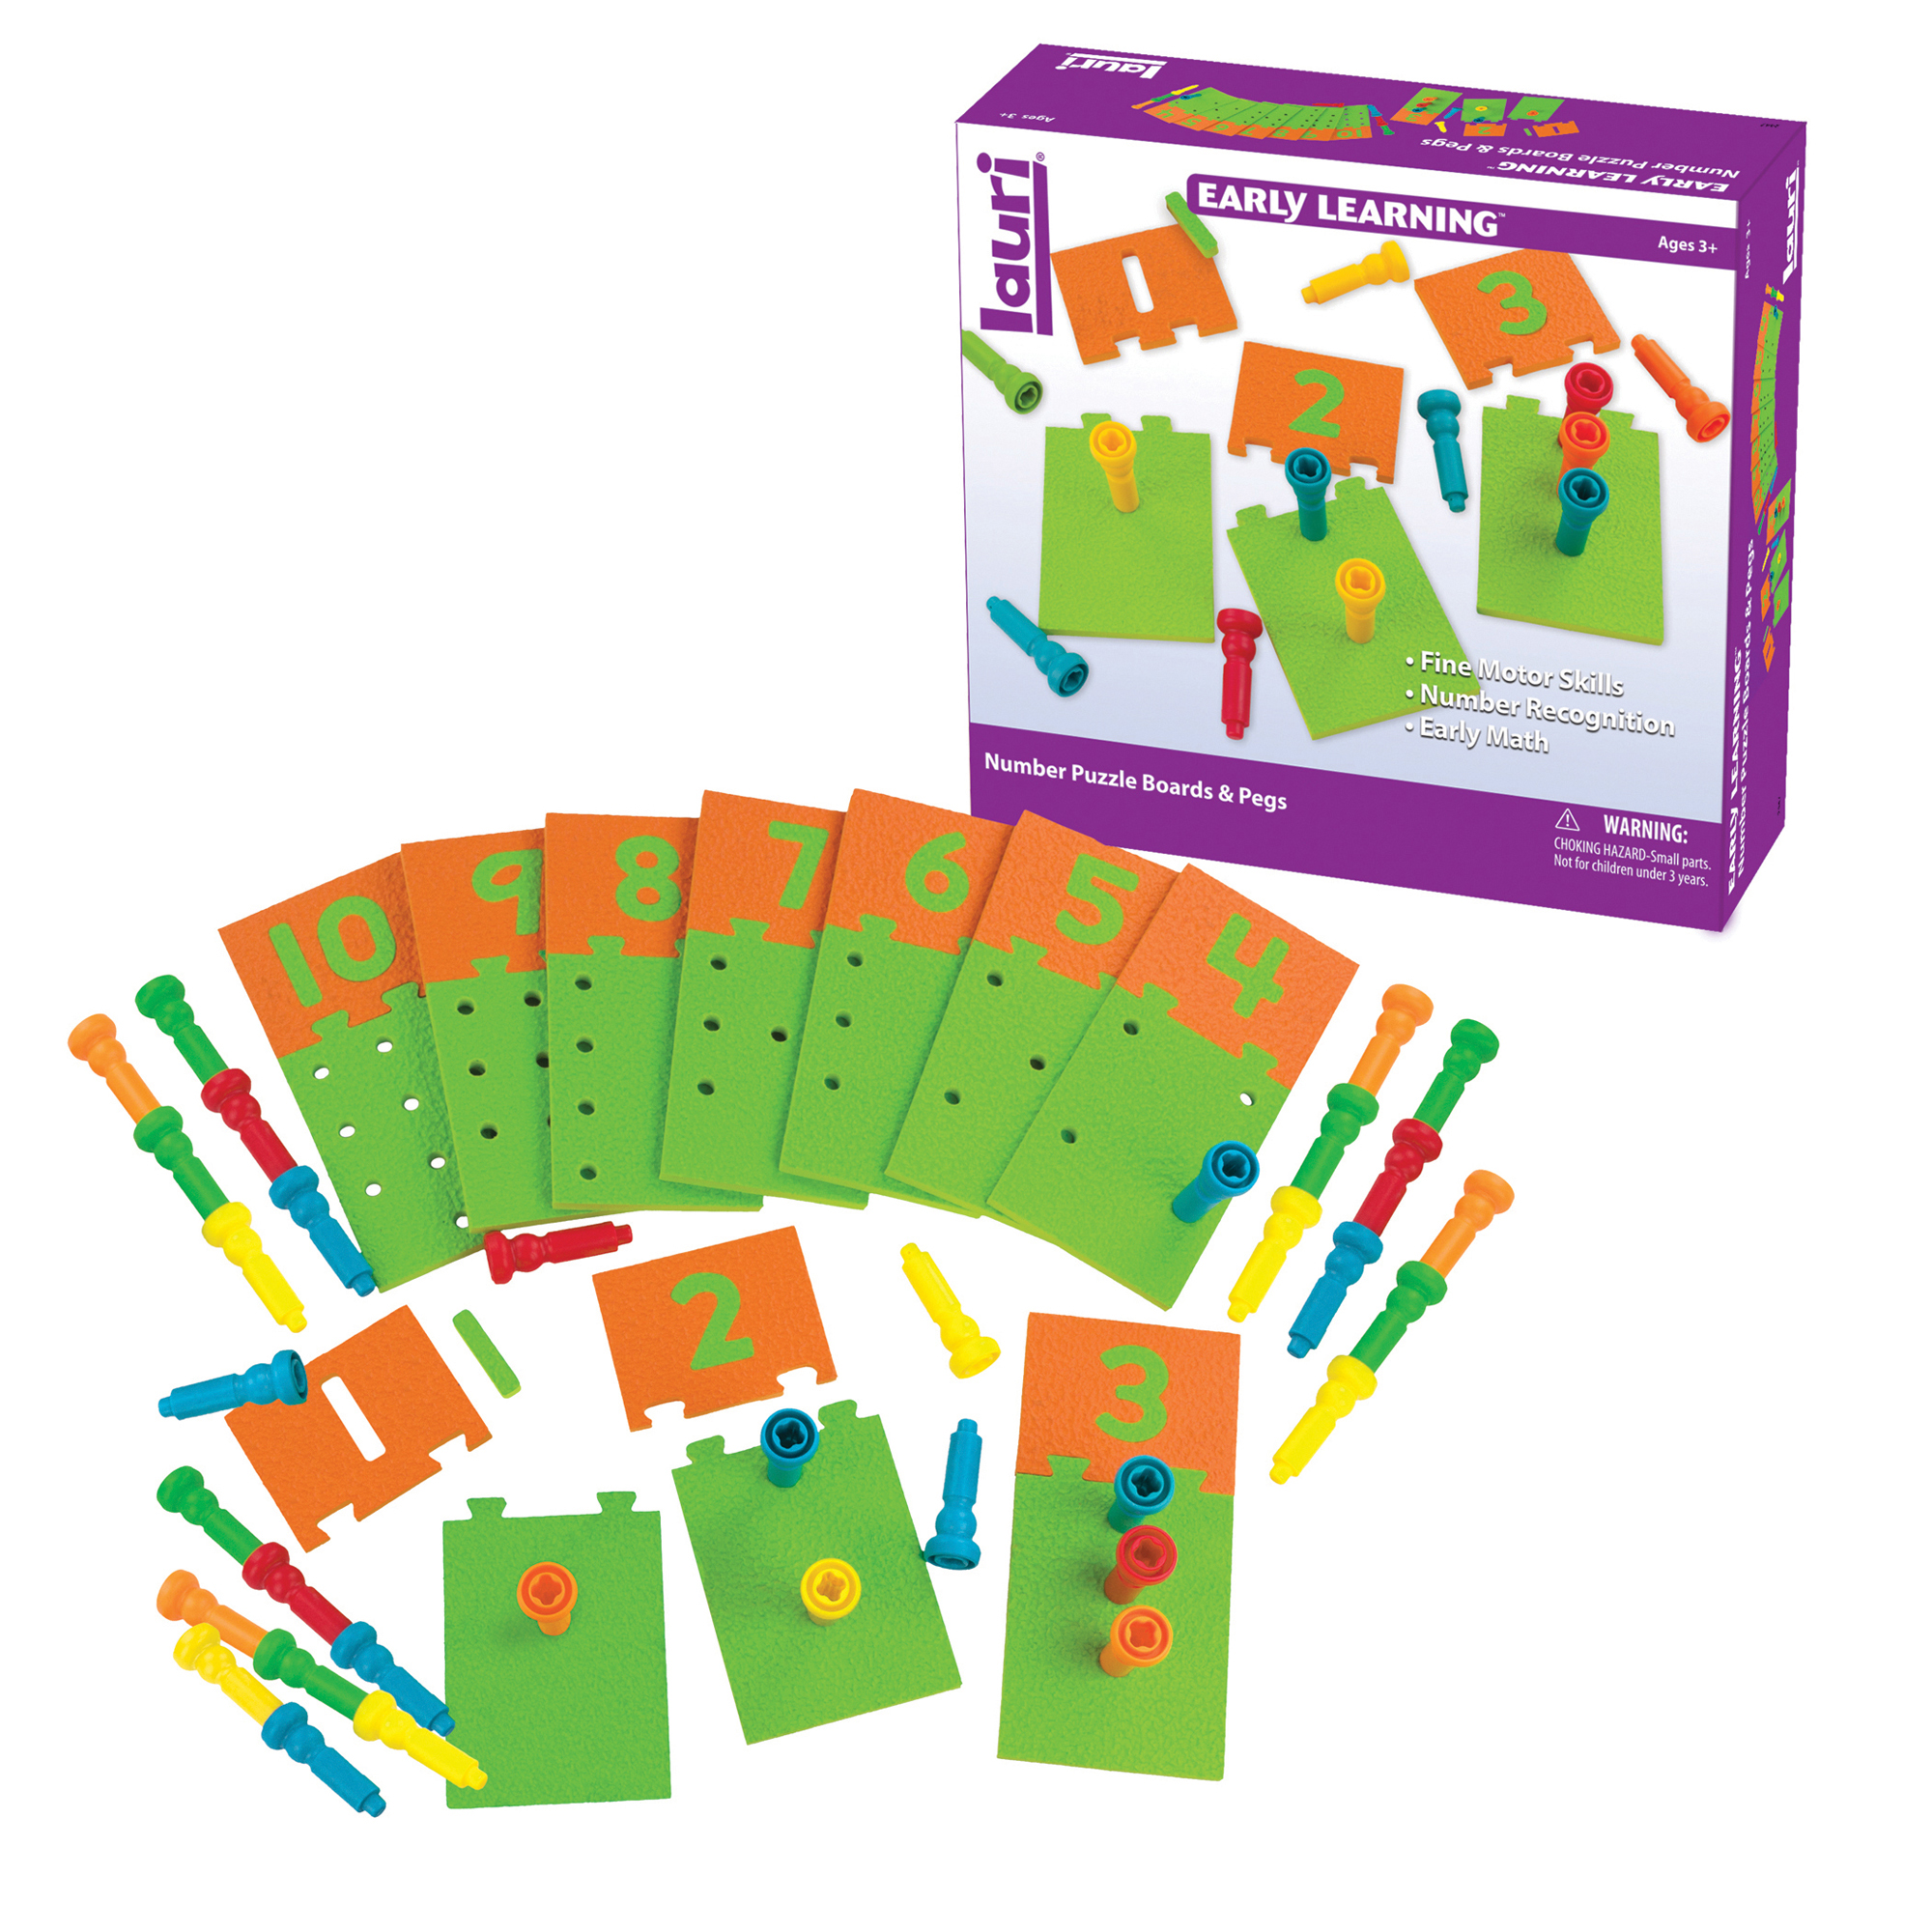 PlayMonster Number Puzzle Boards & Pegs